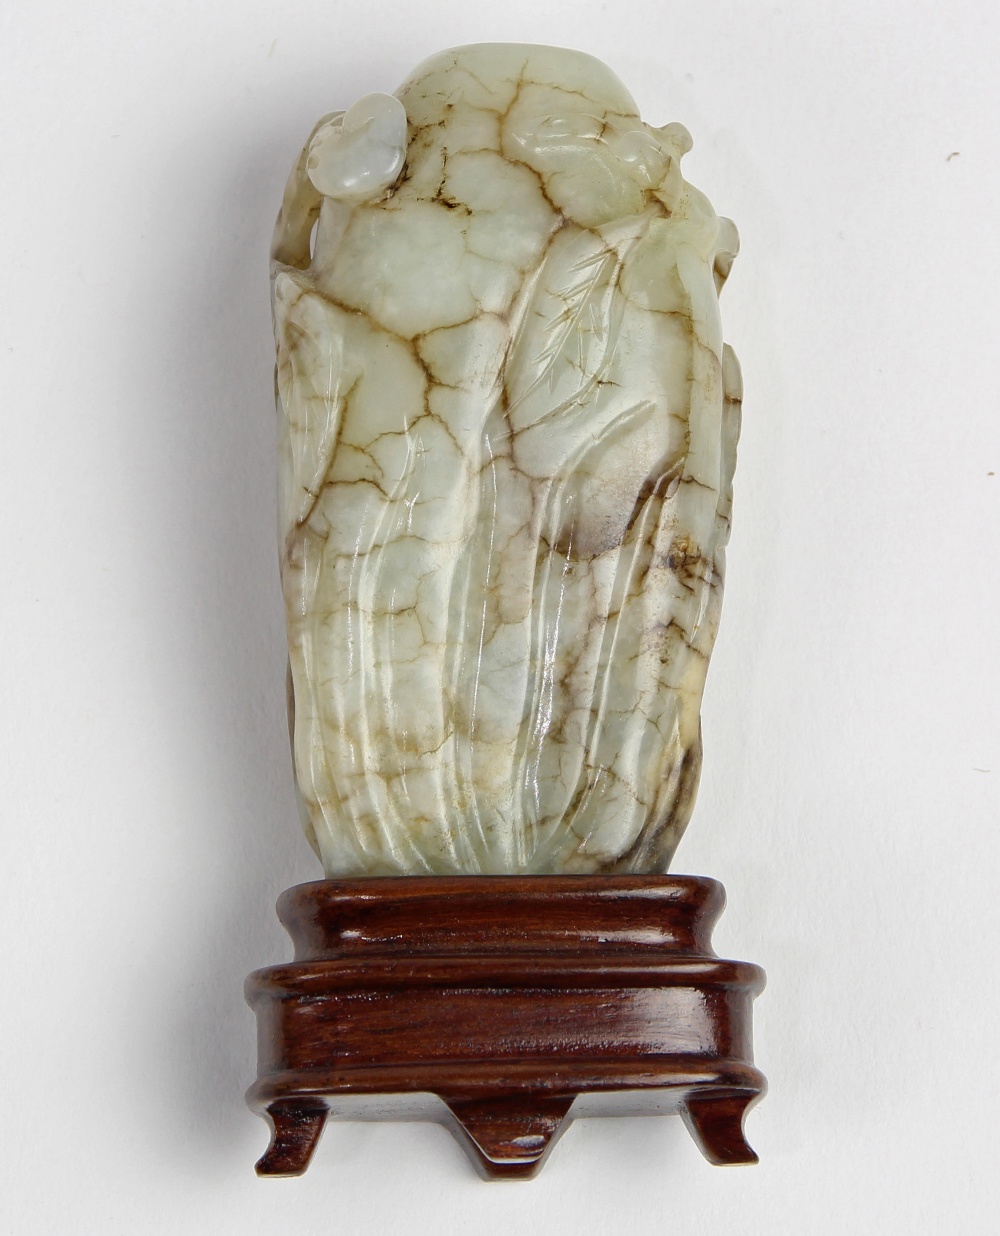 Chinese jade snuff bottle, of melon form accented by leafy tendrils carved in relief, the white-gray